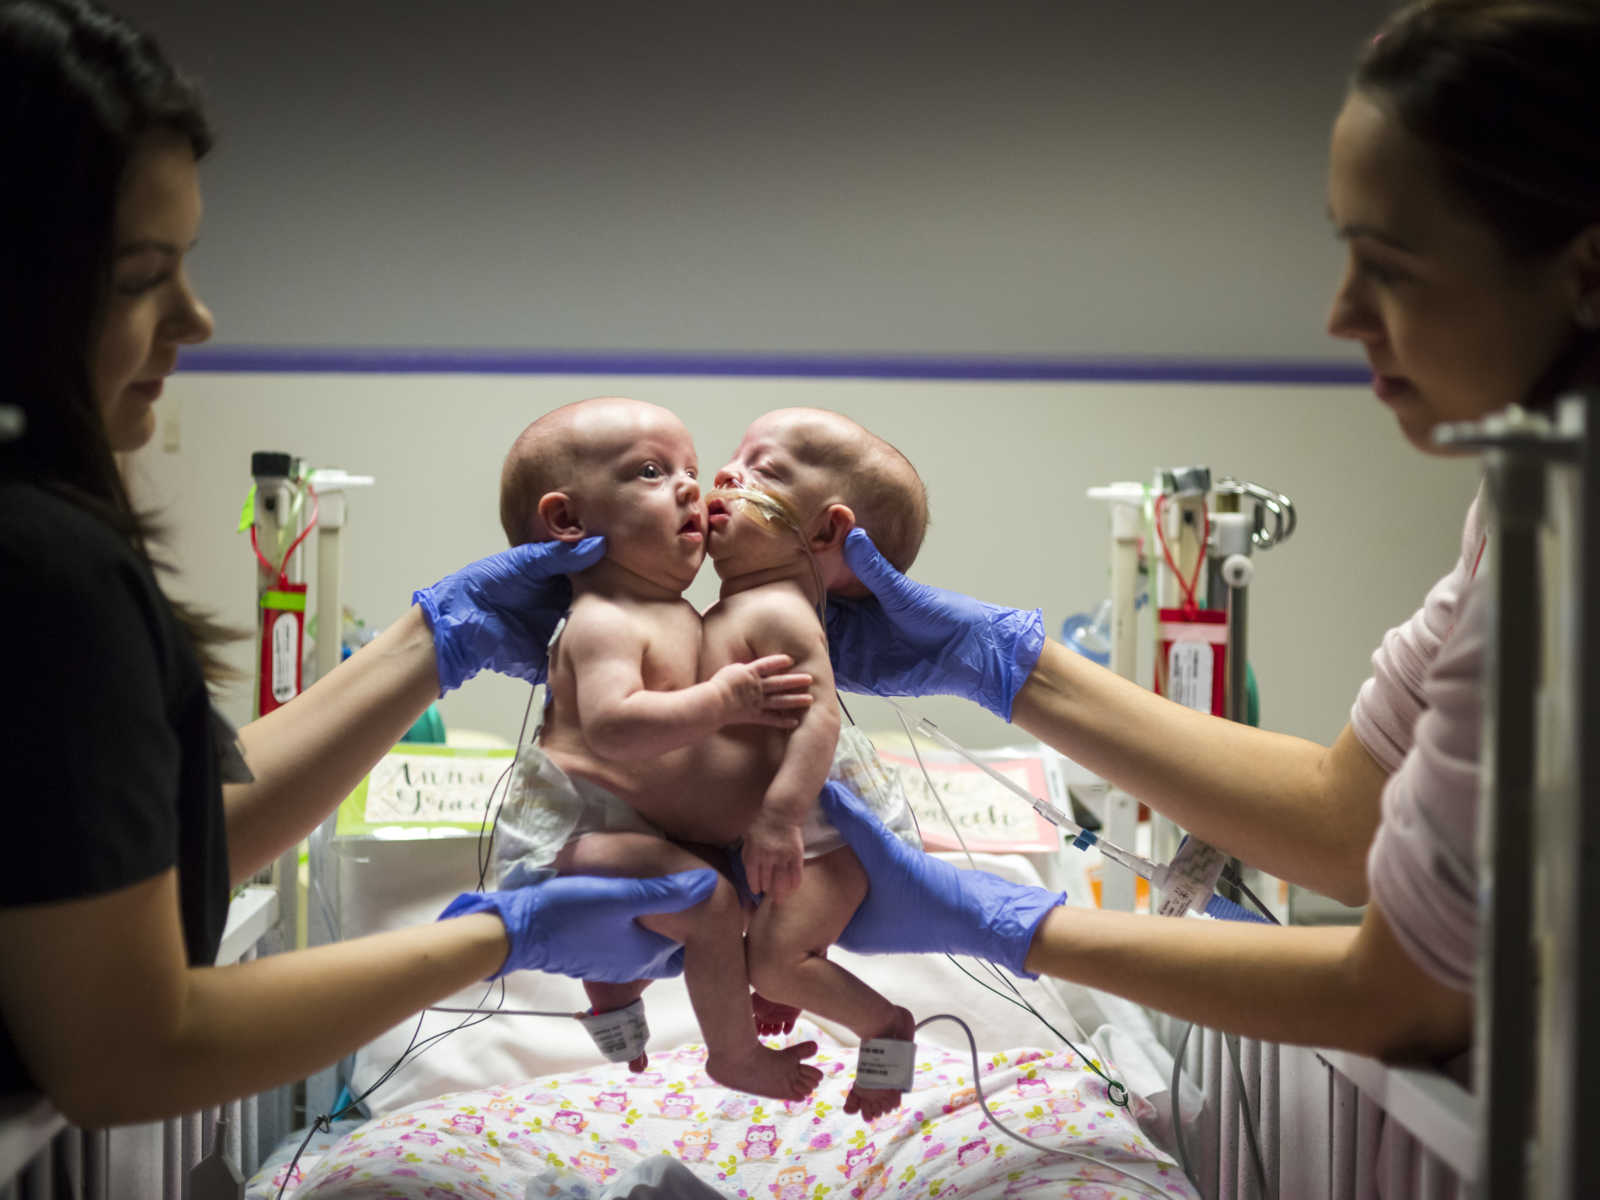 conjoined newborns being held in the air above hospital bed by two women on either side of them 